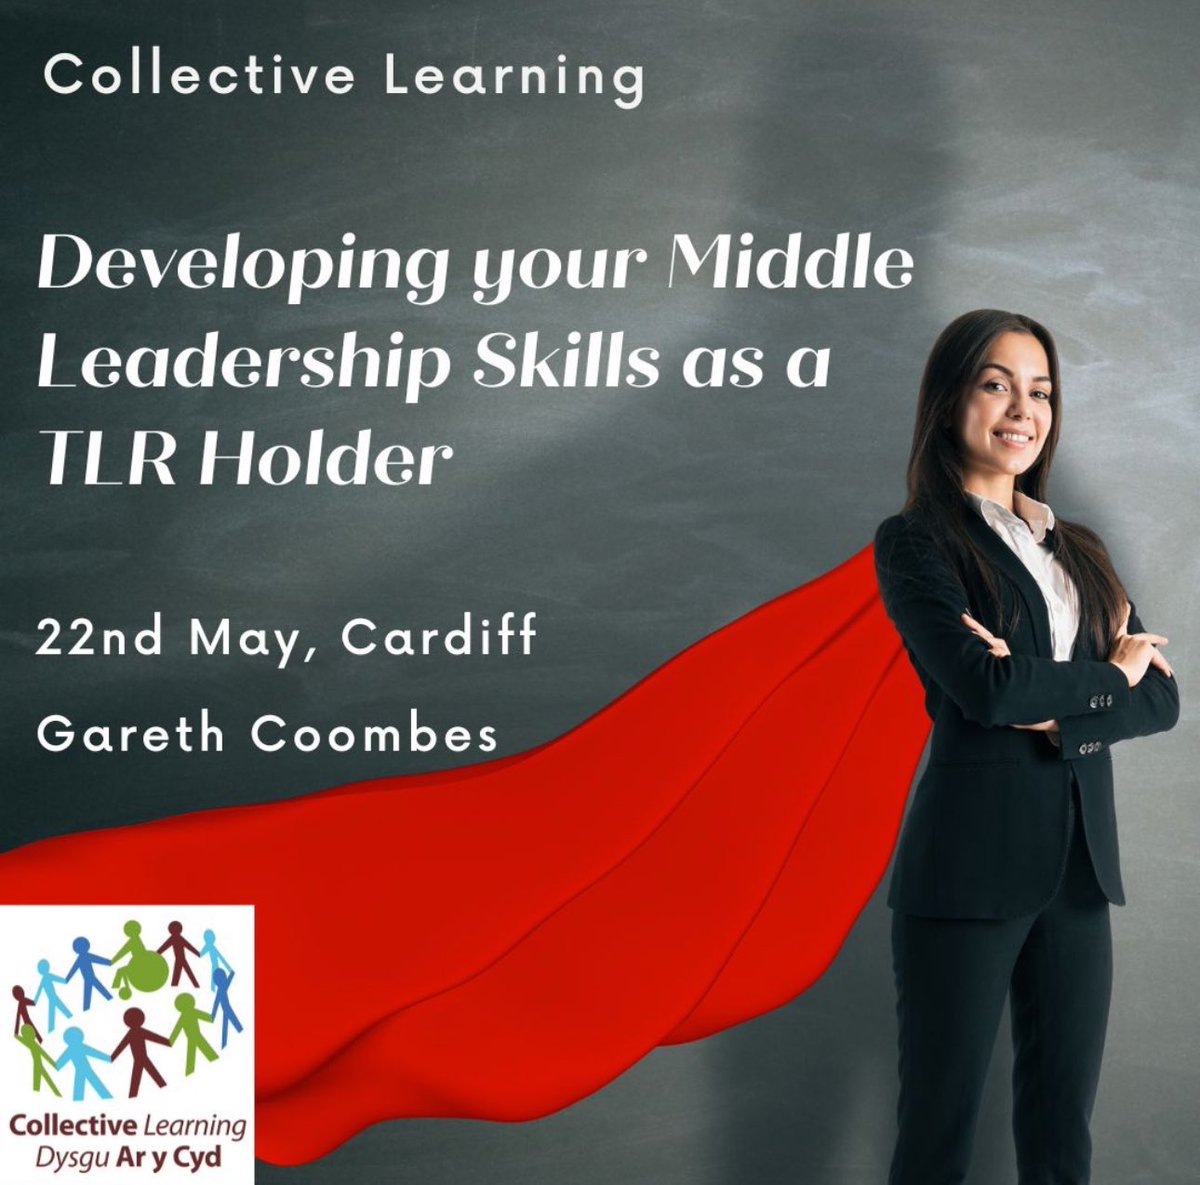 Course - 'Developing Your Middle Leadership Skills as a TLD Holder' Presenter - Gareth Coombes May 22nd - Cardiff Contact us for booking. 

#TLR #middleleadership #primaryschool #primaryeducation